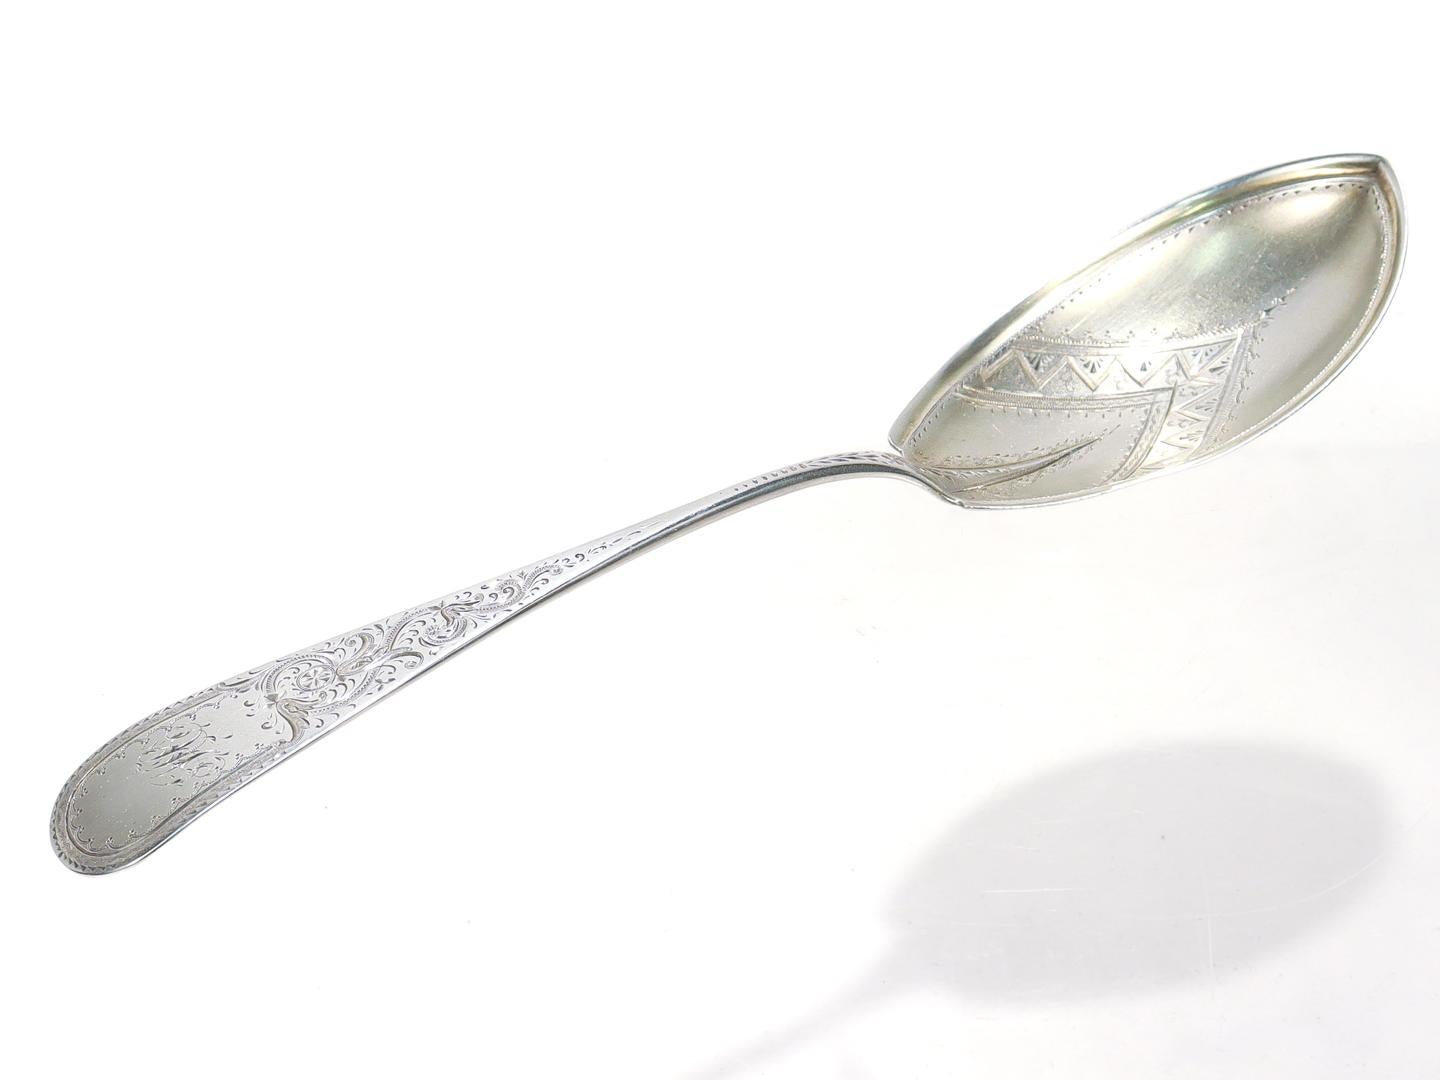 American Aesthetic Period R. & W. Wilson Brite Cut Sterling Silver Serving Spoon For Sale 2